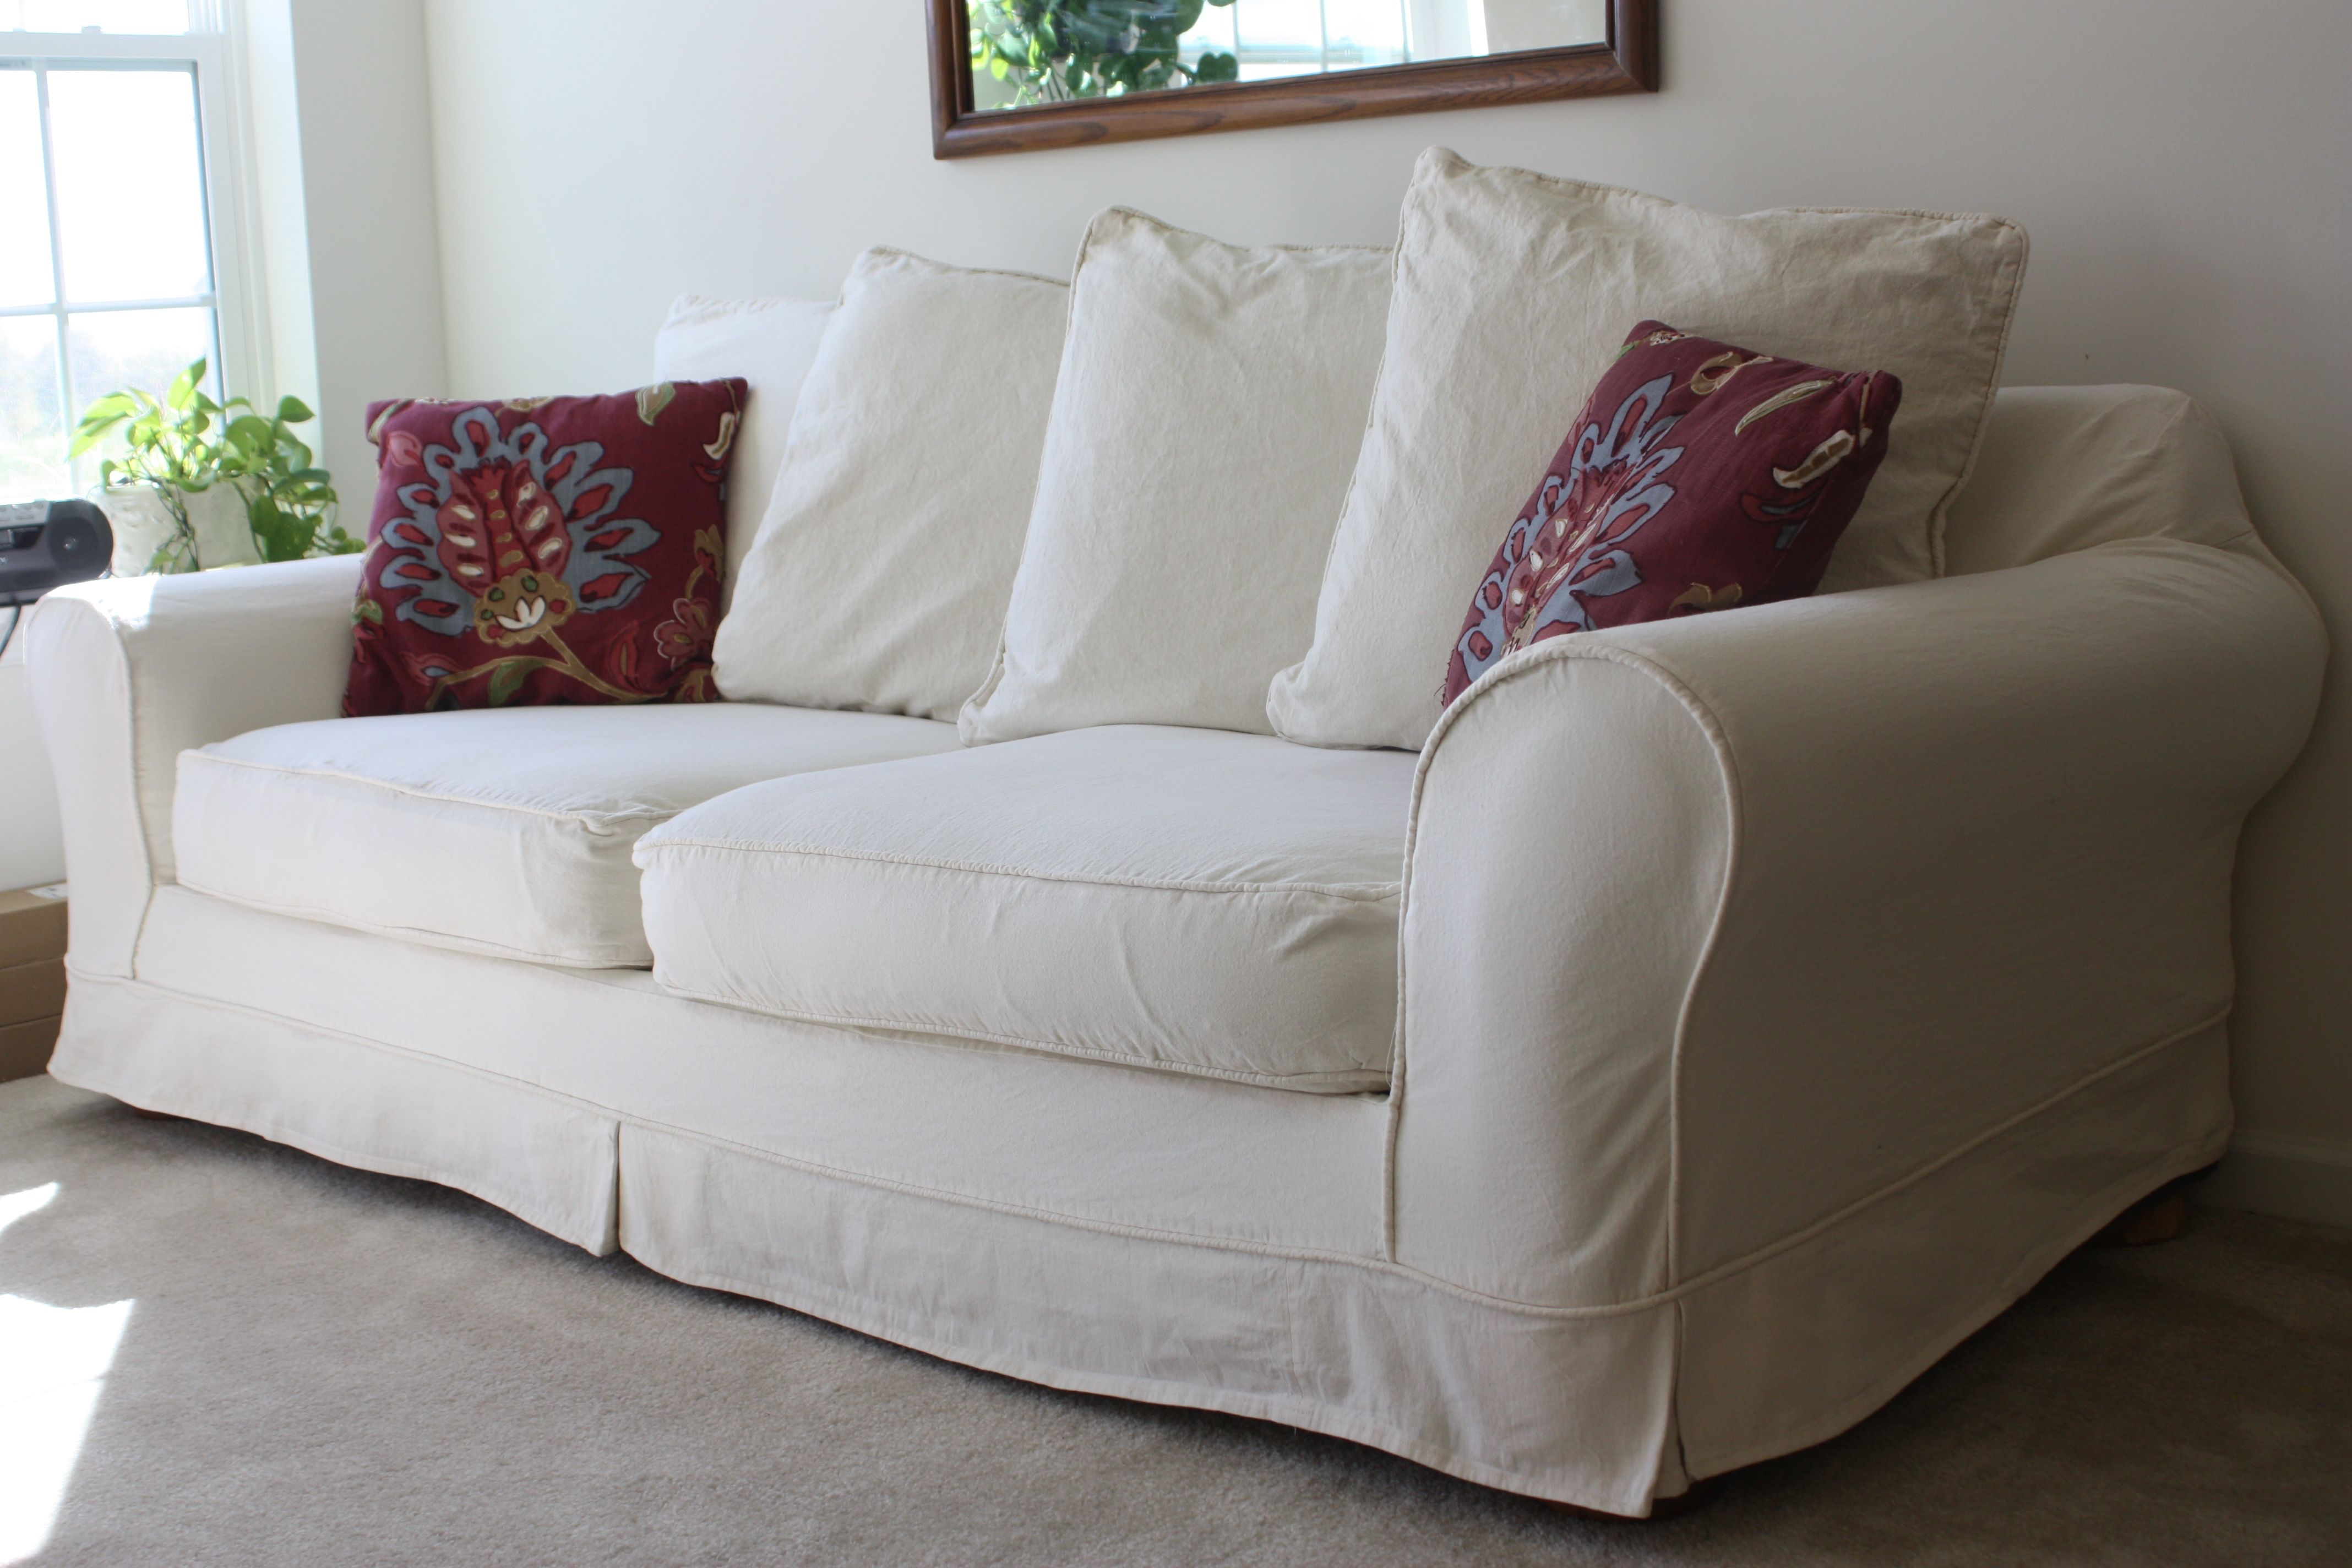 Slipcovers For Sofas And Chairs Best Home Furniture Ideas Throughout Slipcovers For Chairs And Sofas (View 8 of 15)